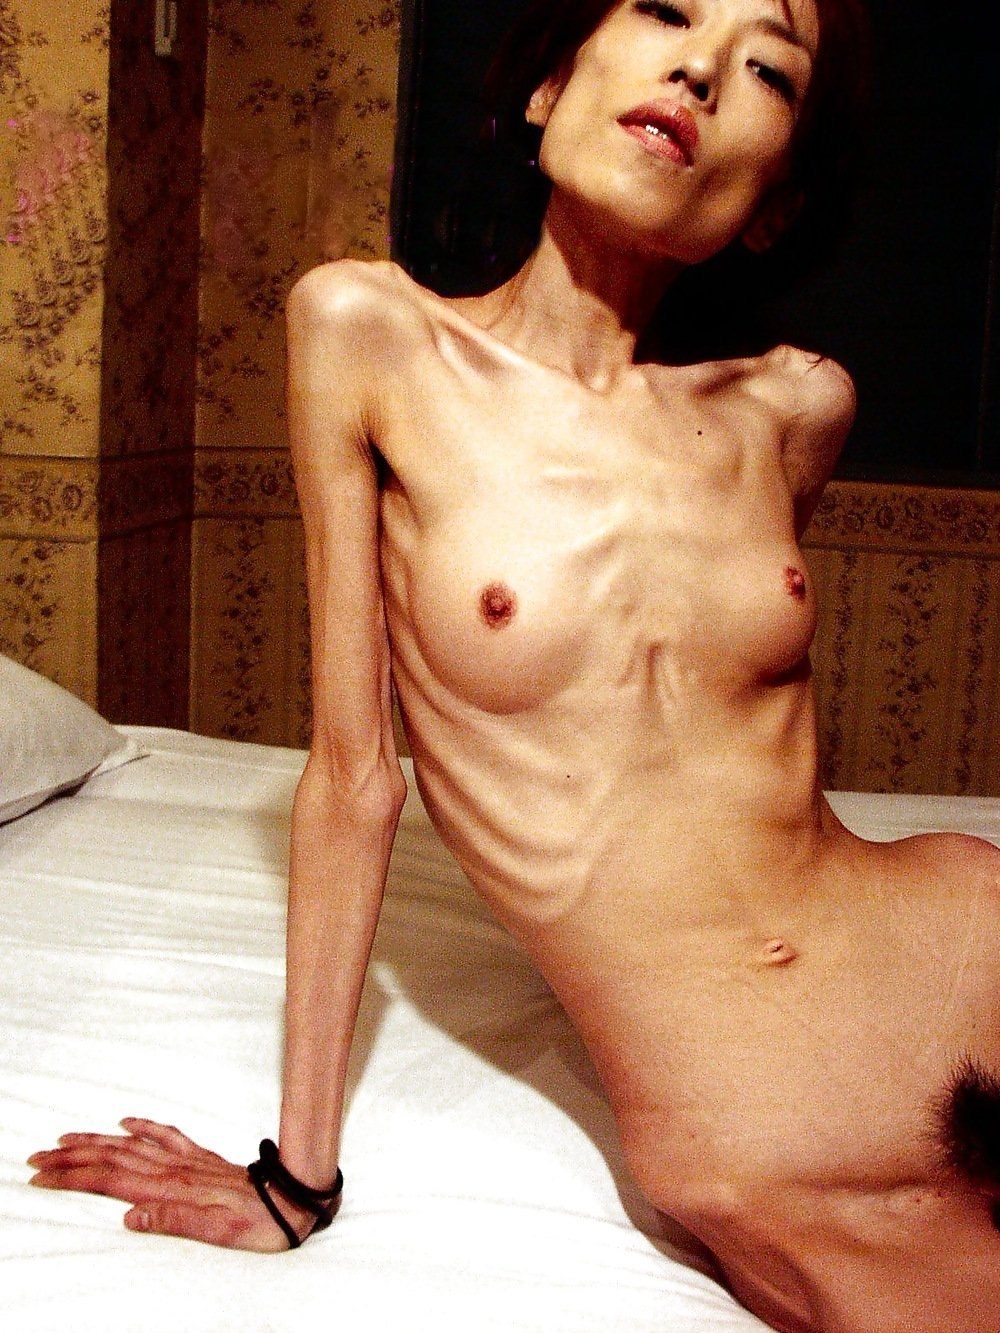 Sex with Anorexic Girl (82 photos) image pic